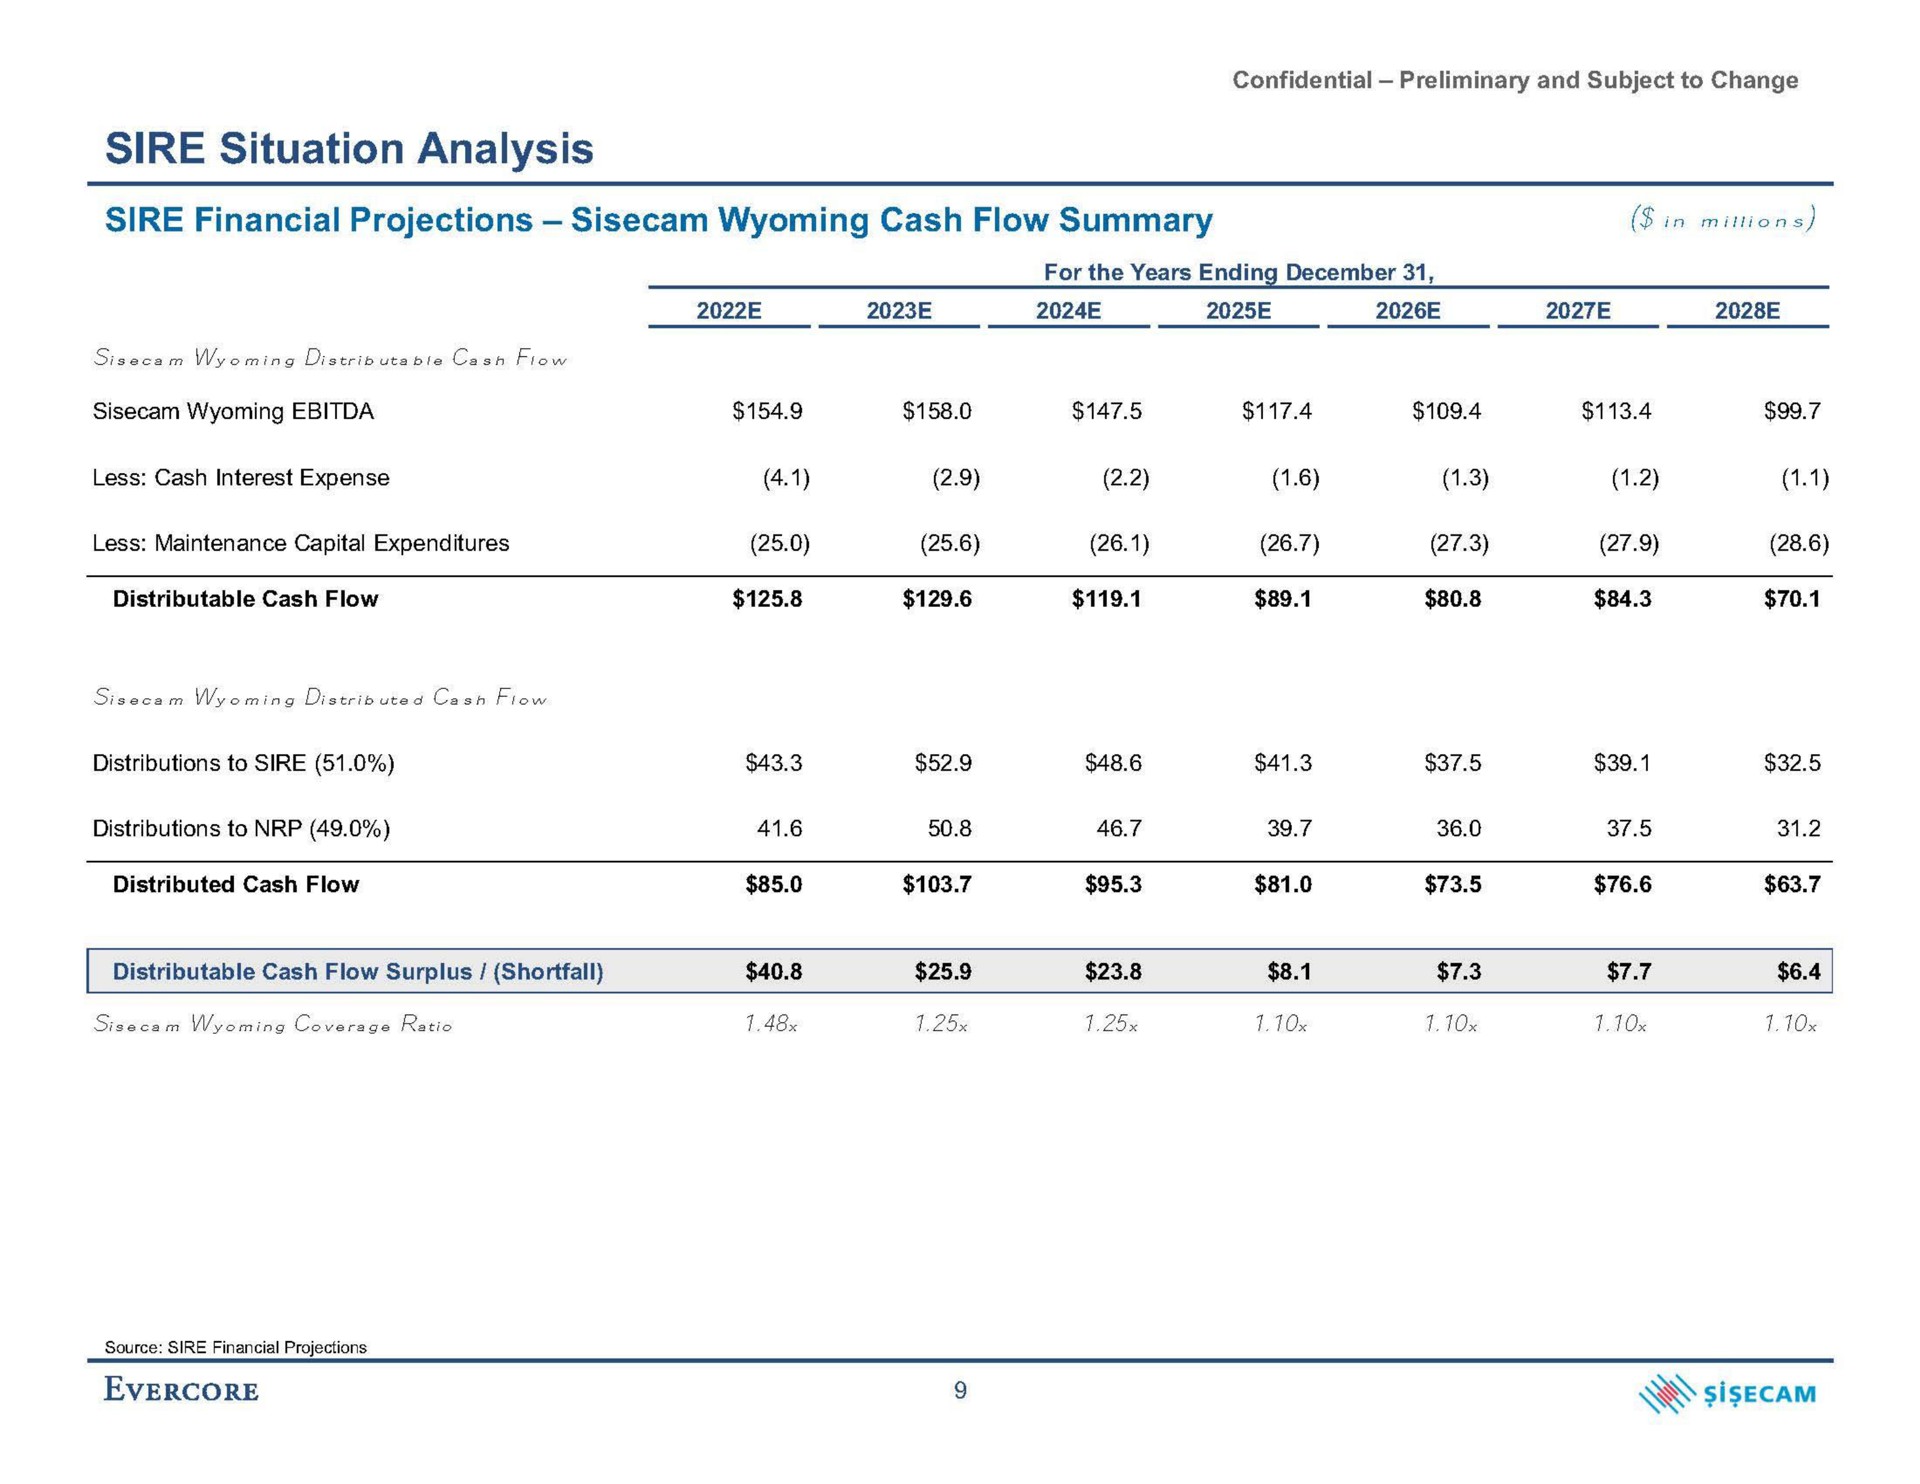 sire situation analysis sire financial projections cash flow summary | Evercore